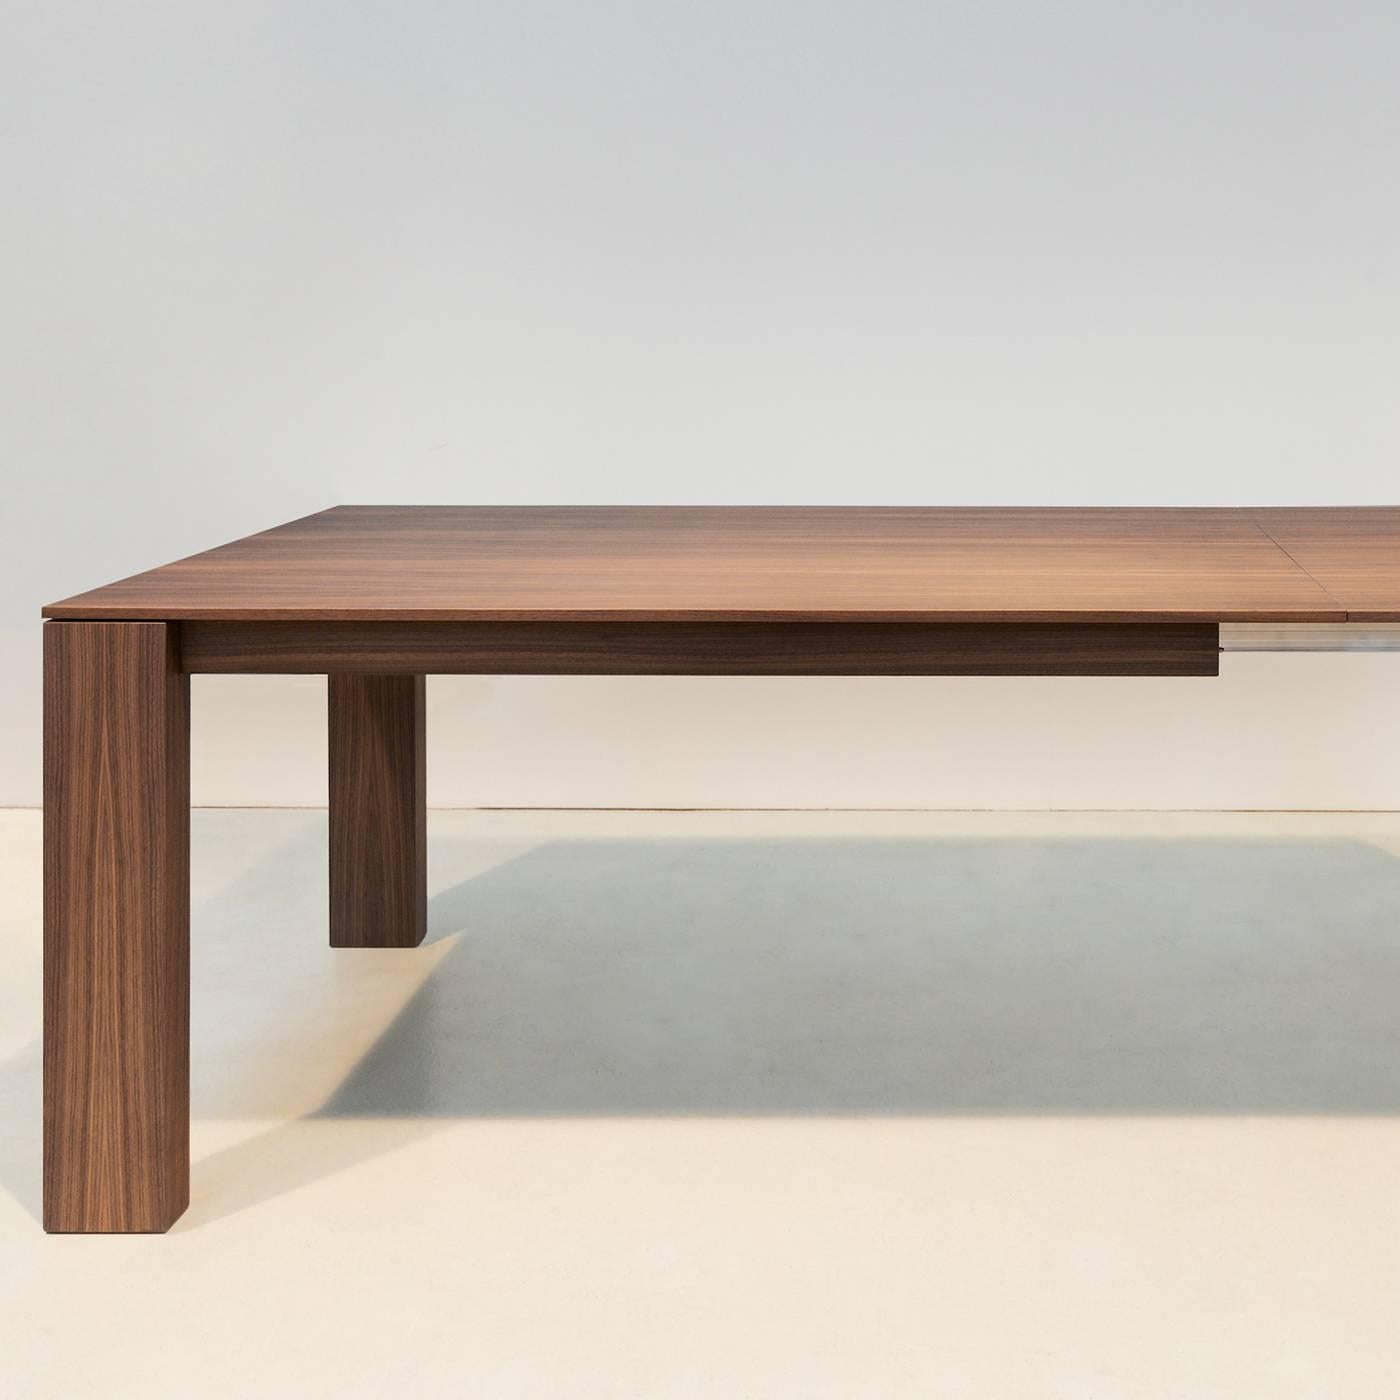 The exquisite Minimalist design of this handcrafted table with subtle, refined details is Frigerio's trademark. Made of Canaletto walnut veneer, the singularity of this table is its ultra-slim solid tabletop, measuring just 15mm, that can be